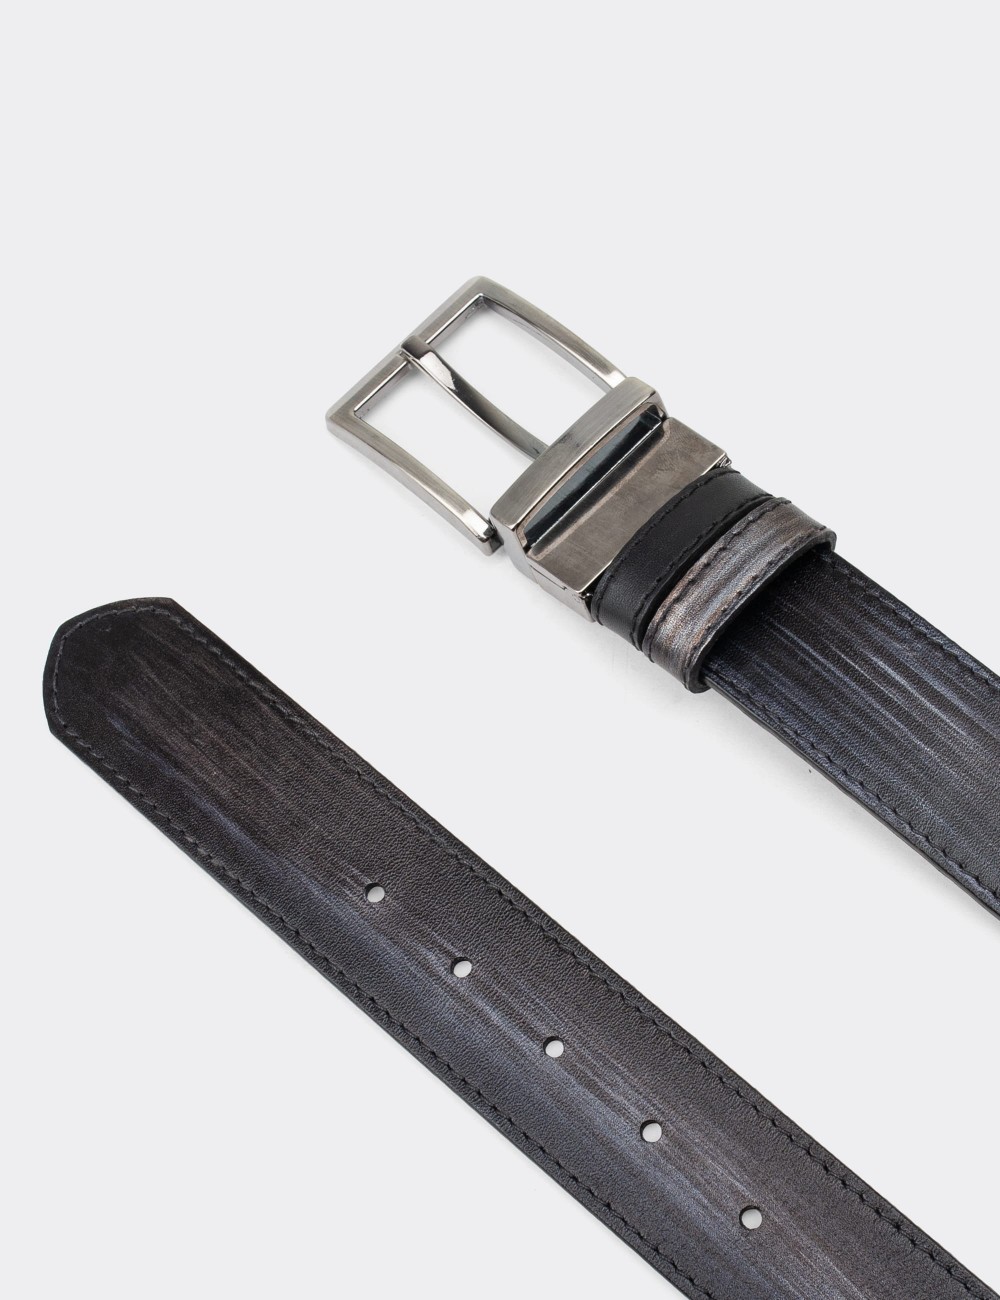  Leather Gray and Black Double Sided Men's Belt - K0409MGRIW01